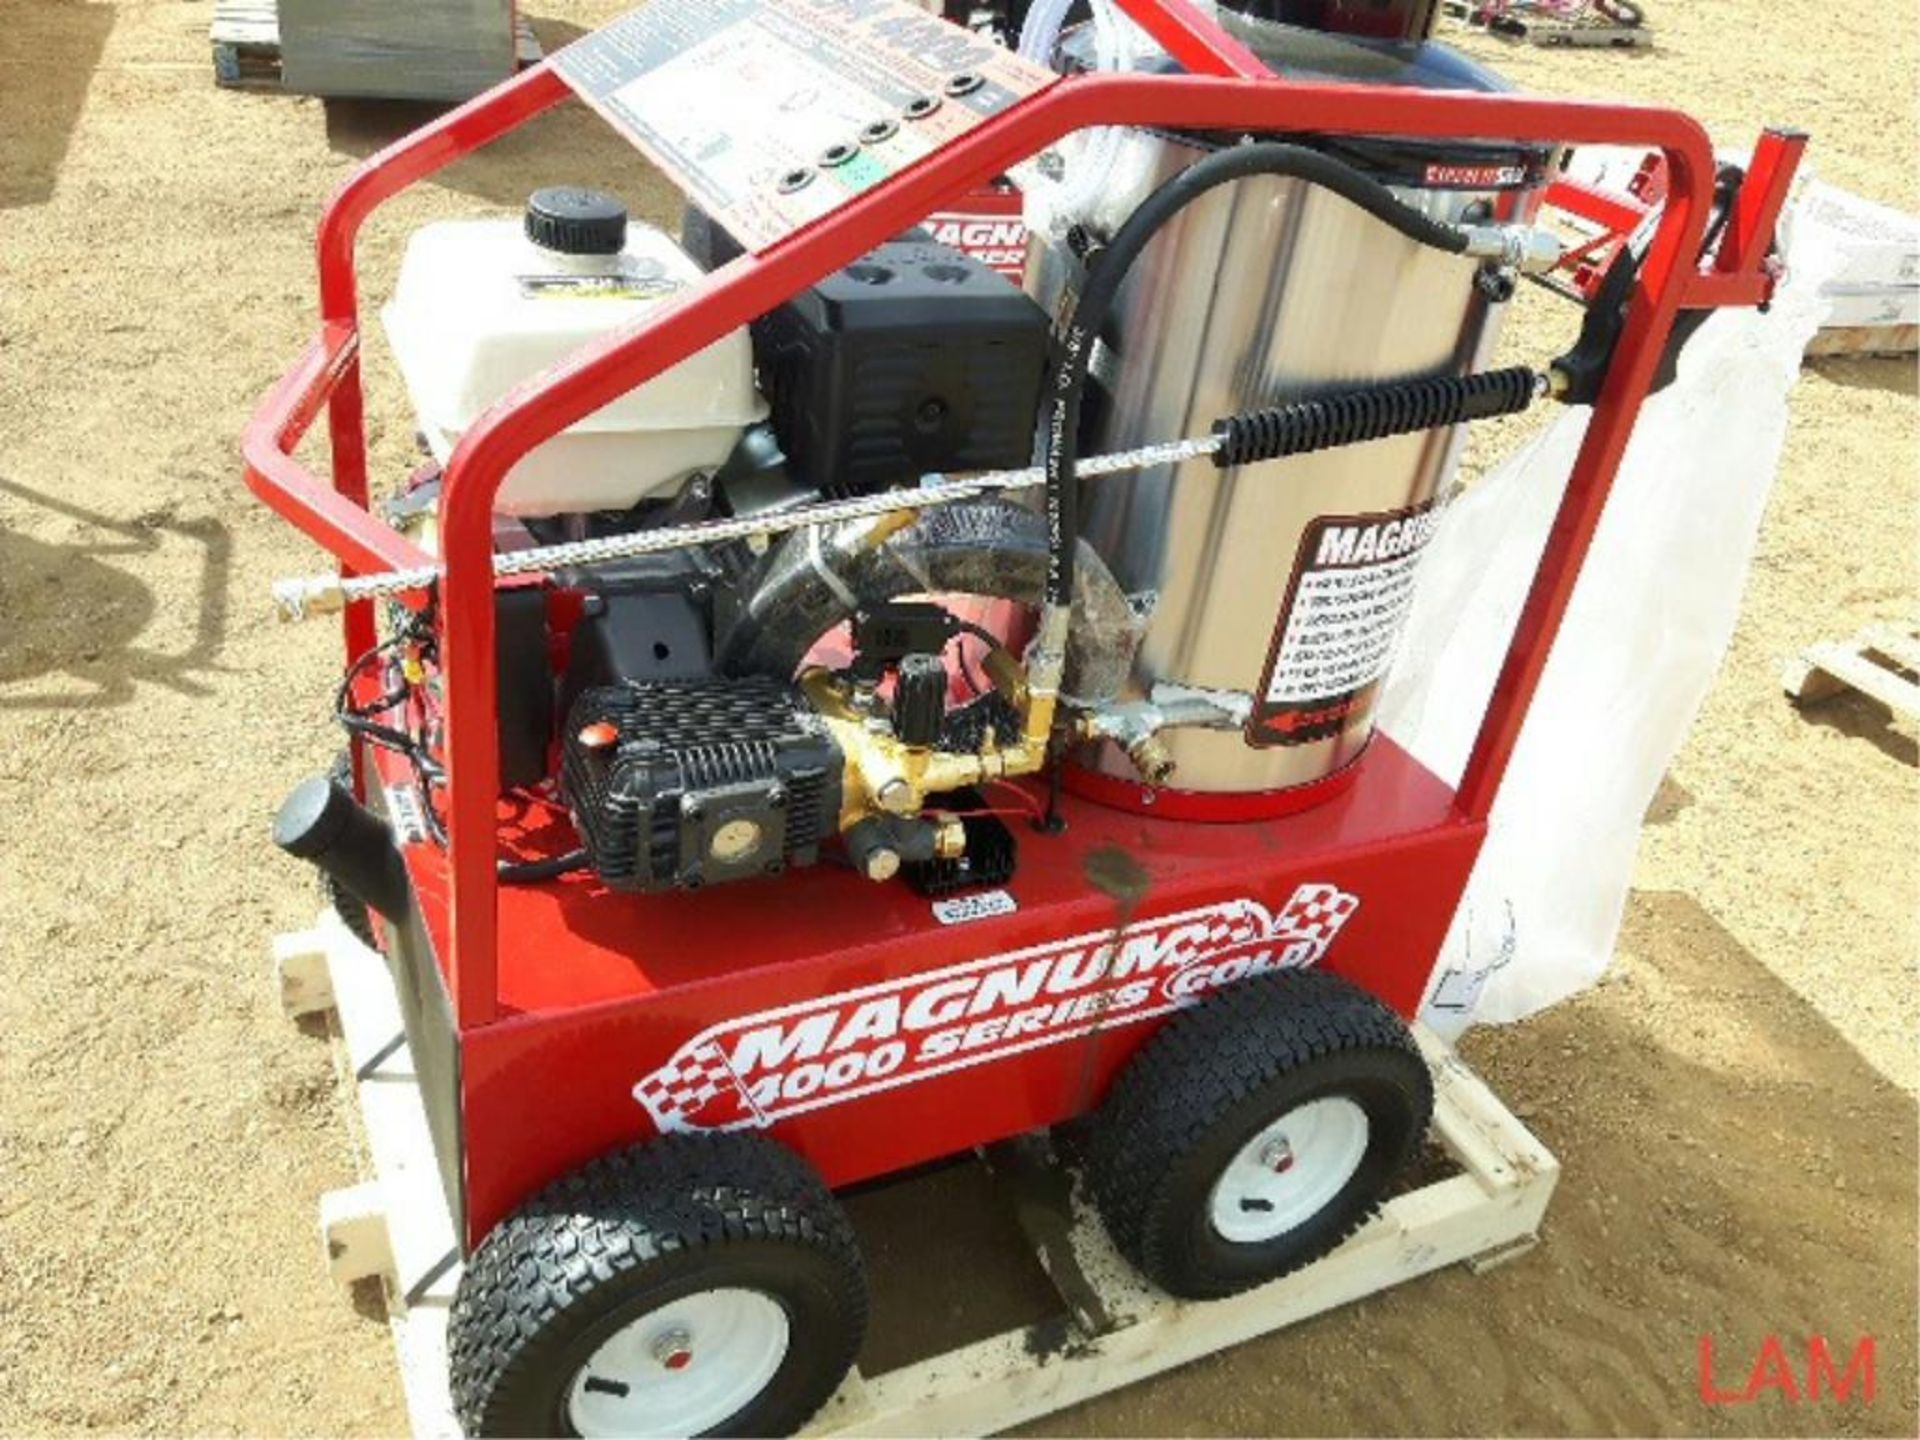 Easy Kleen Diesel Fired Hot Water Pressure Washer Magnum 4000 Series Gold 15 hp elec start eng, 30FT - Image 2 of 4